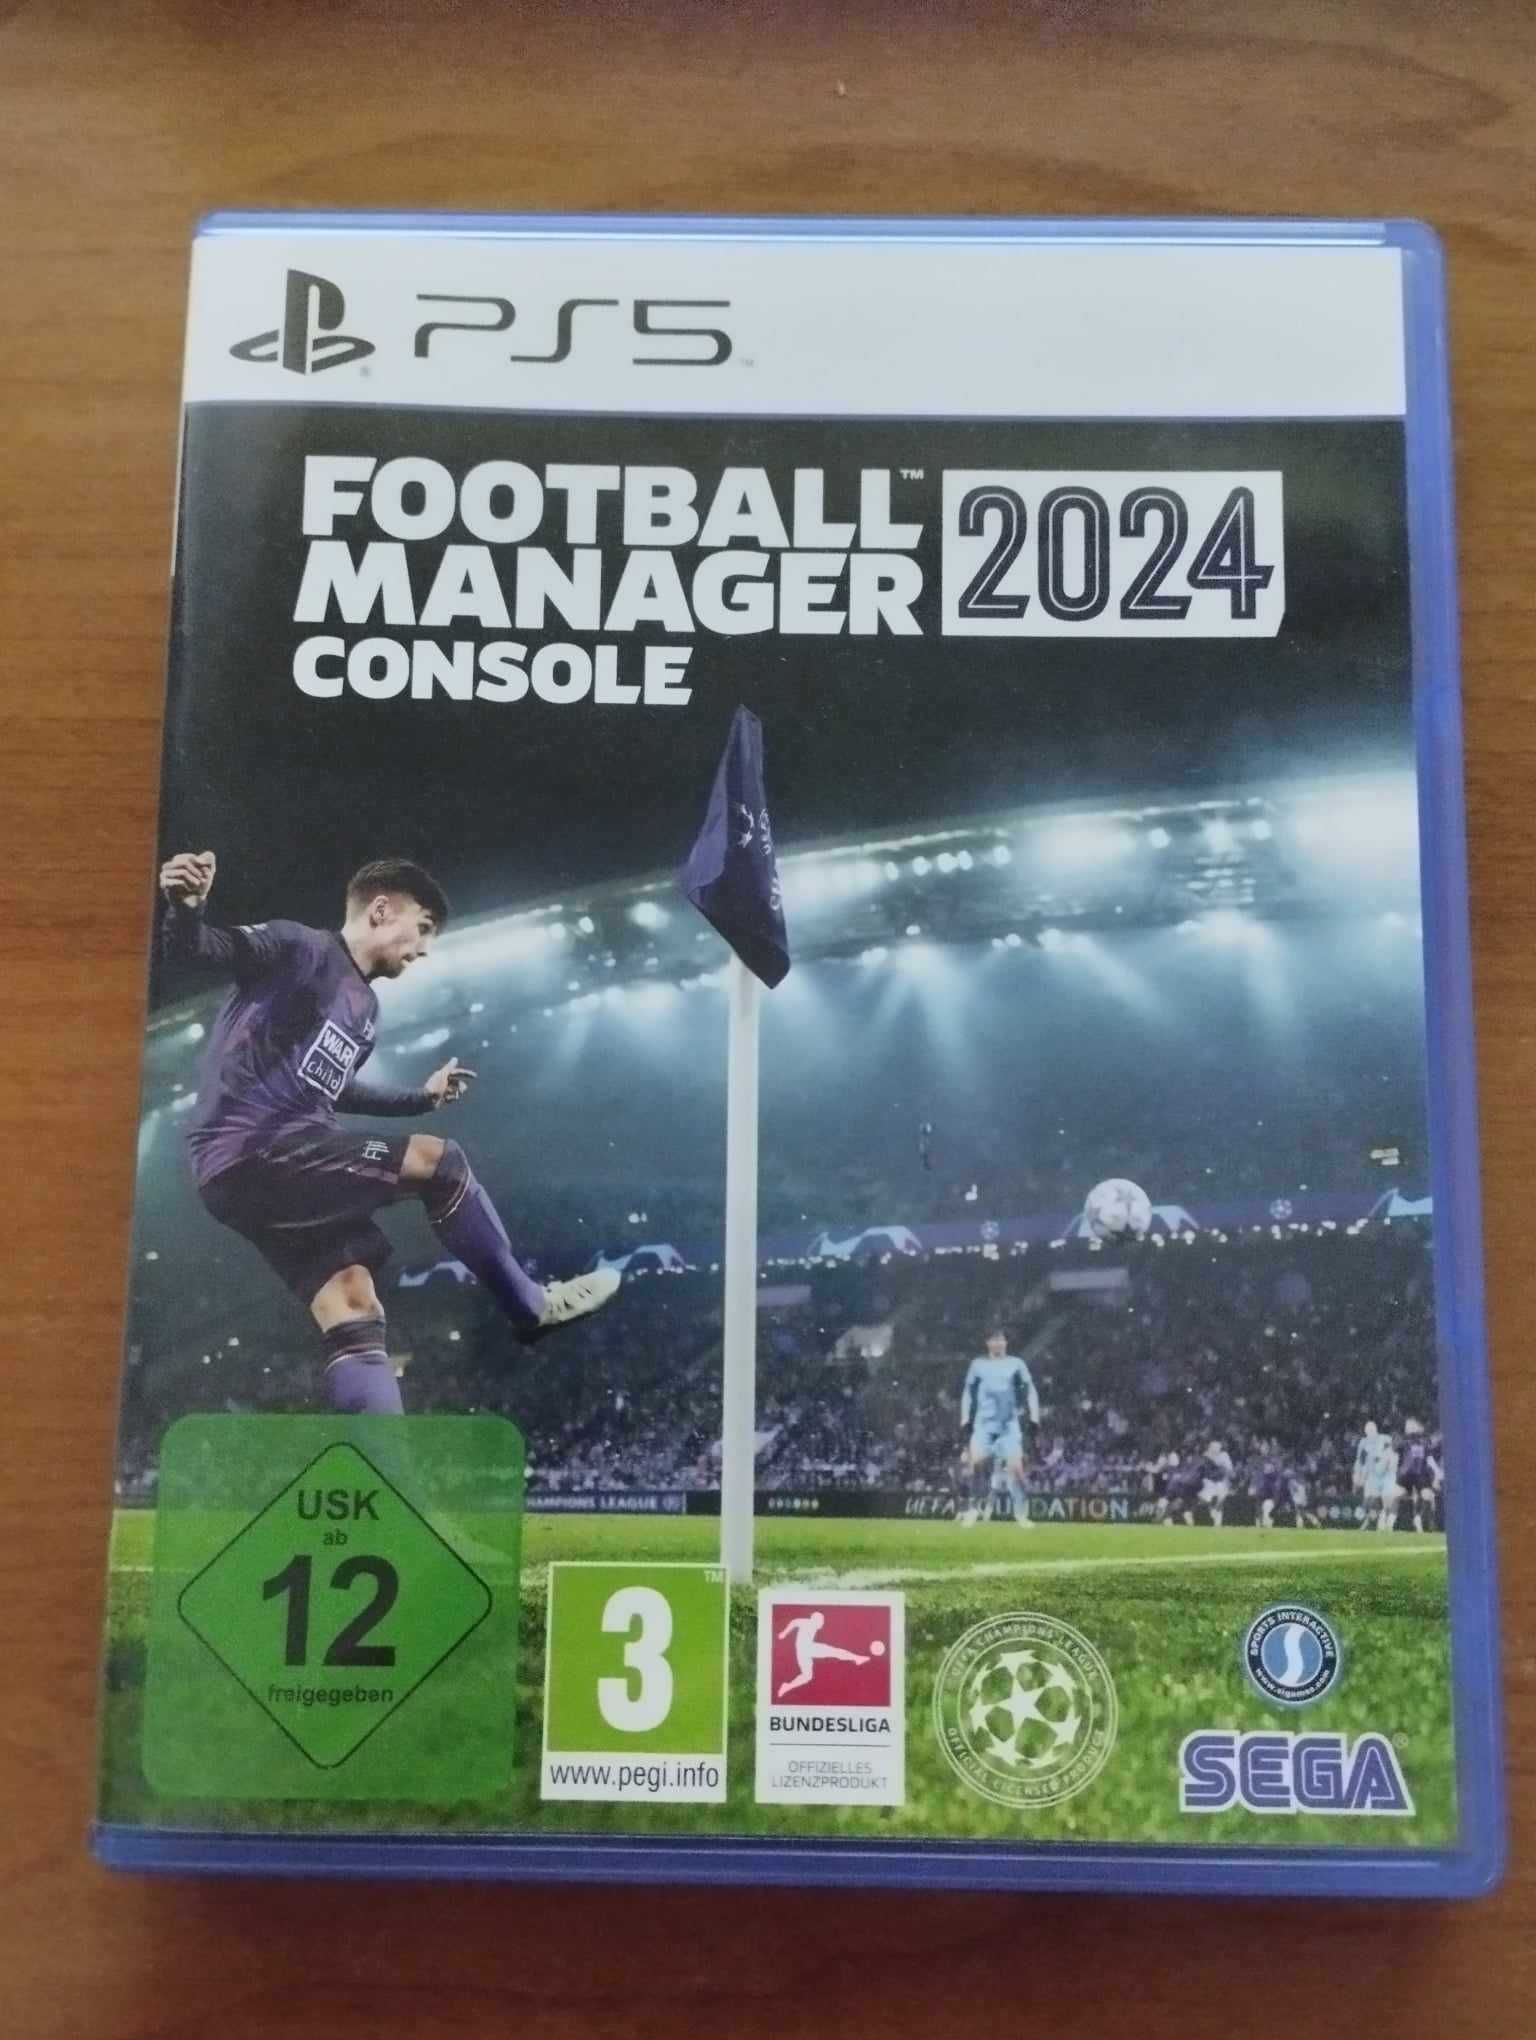 Footbal Manager 2024 console